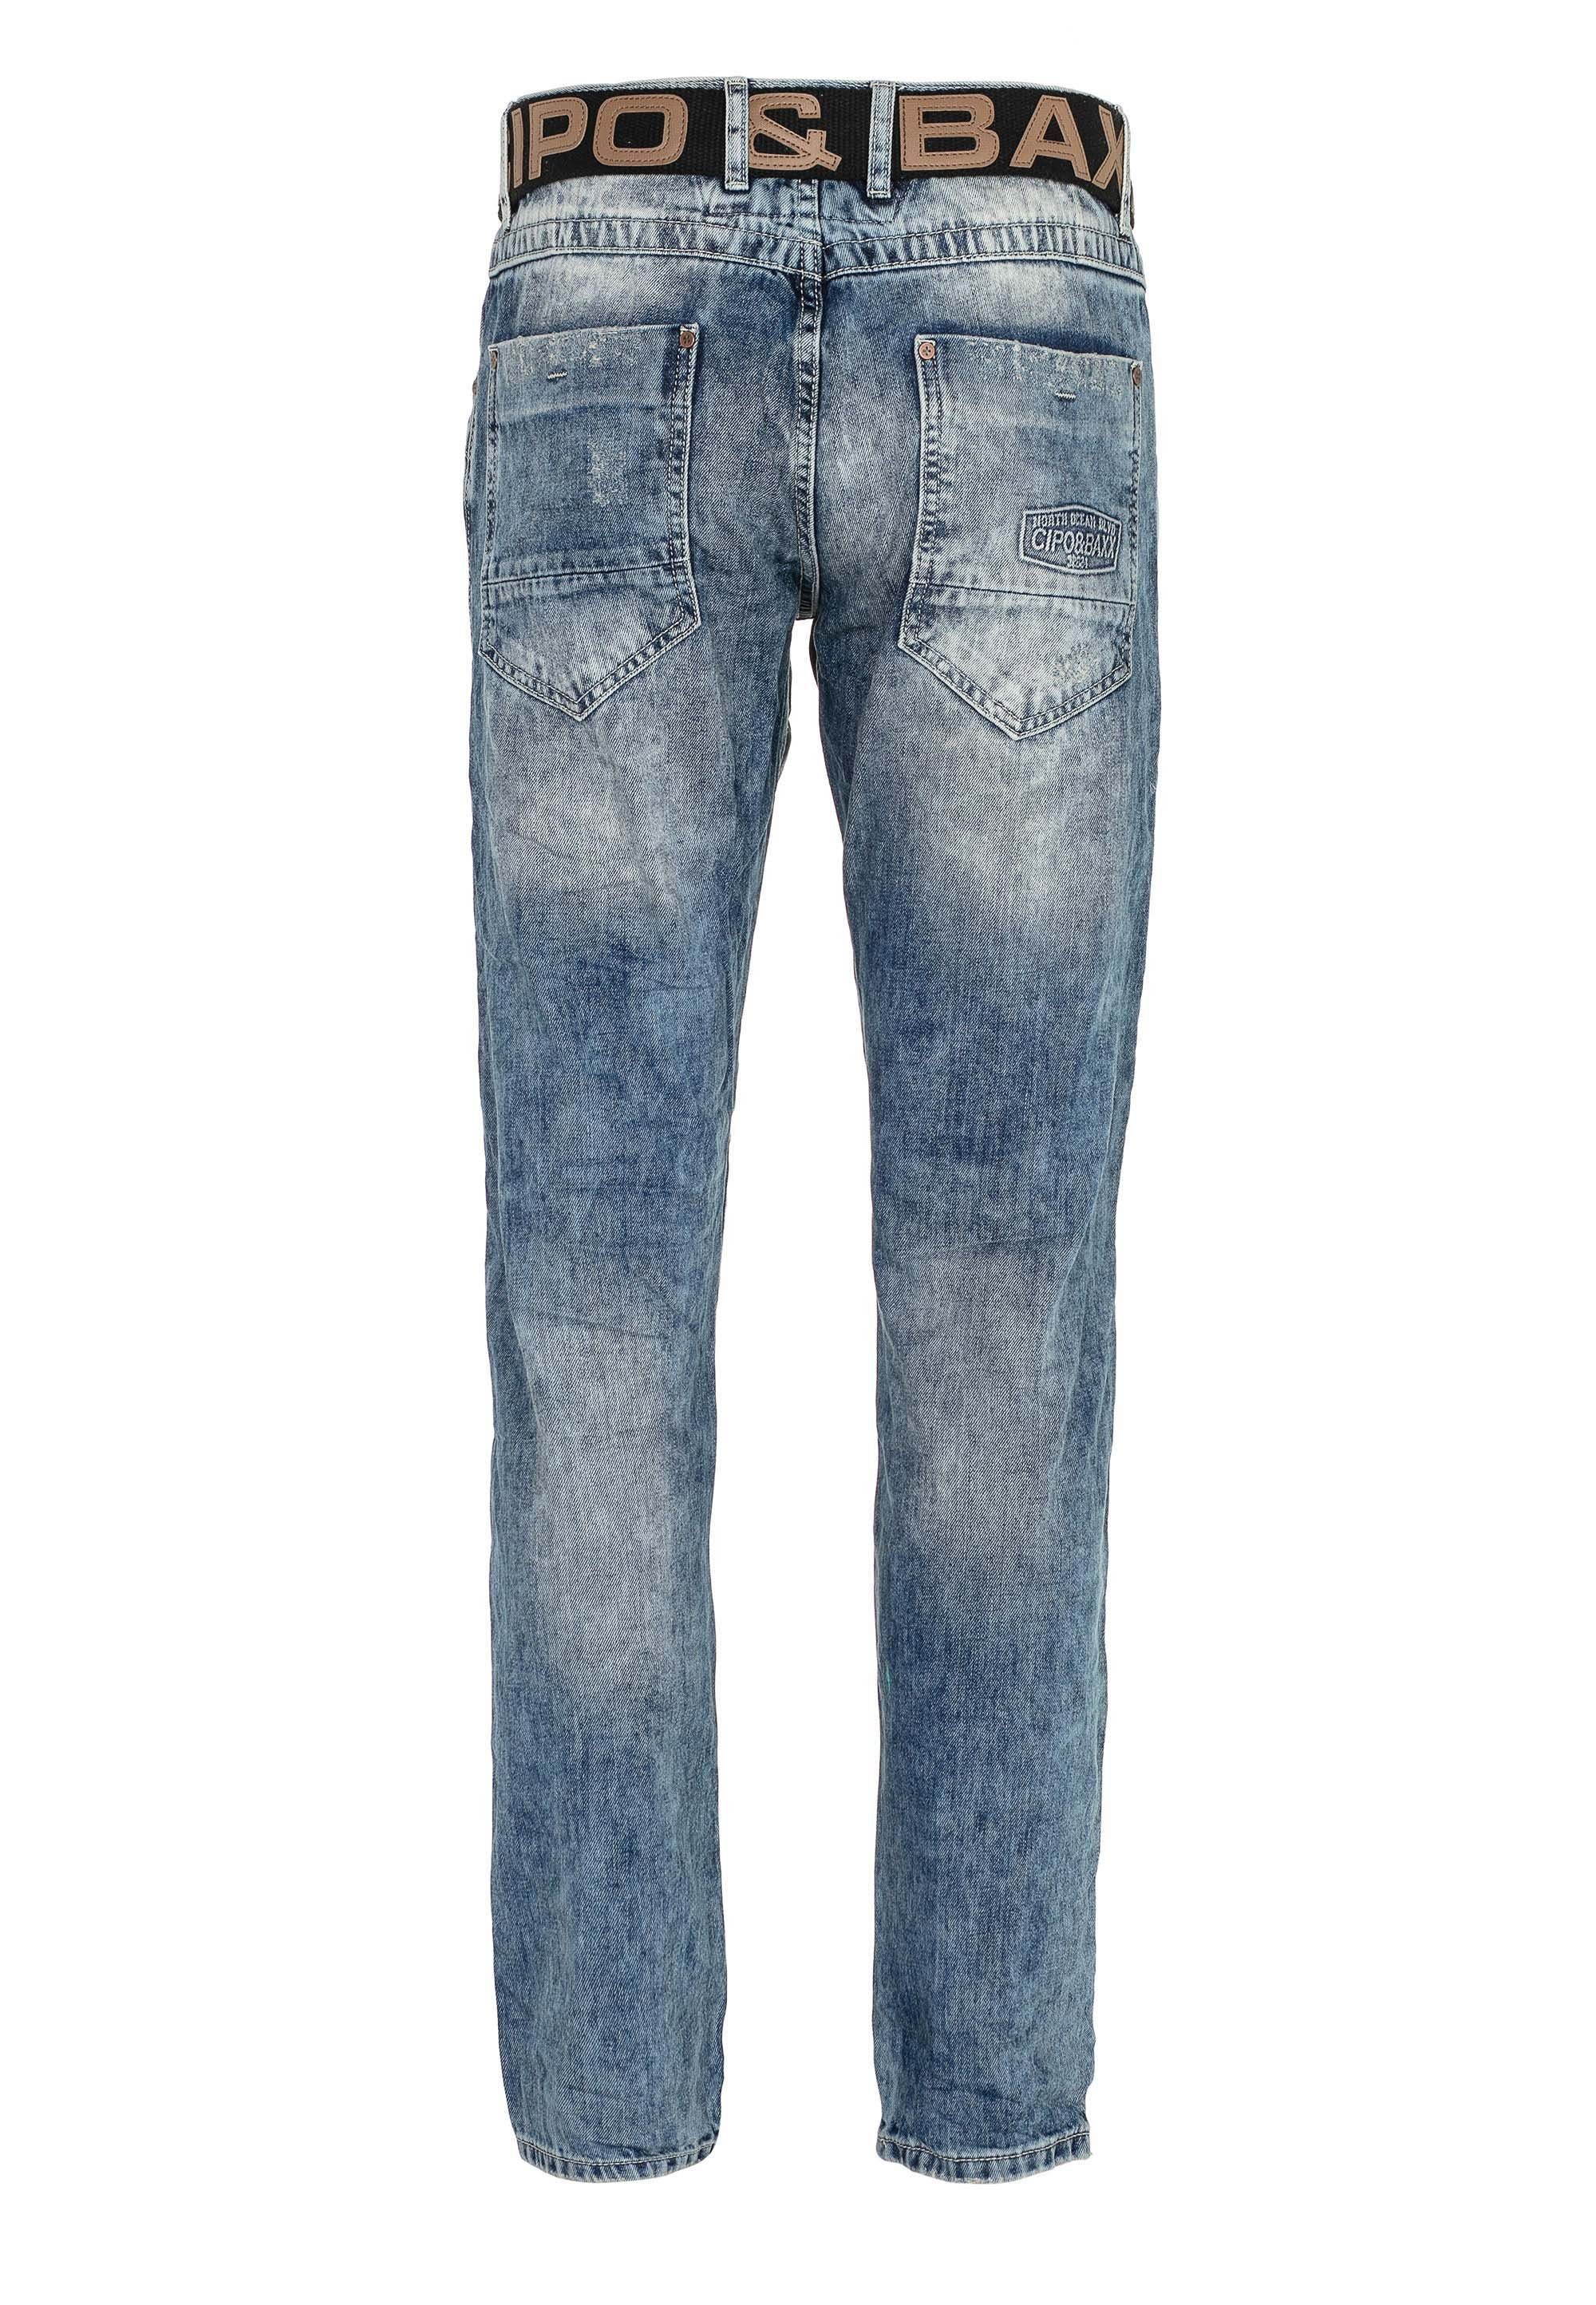 Cipo & mit Jeans in Bequeme Details Straight-Fit Baxx Ripped